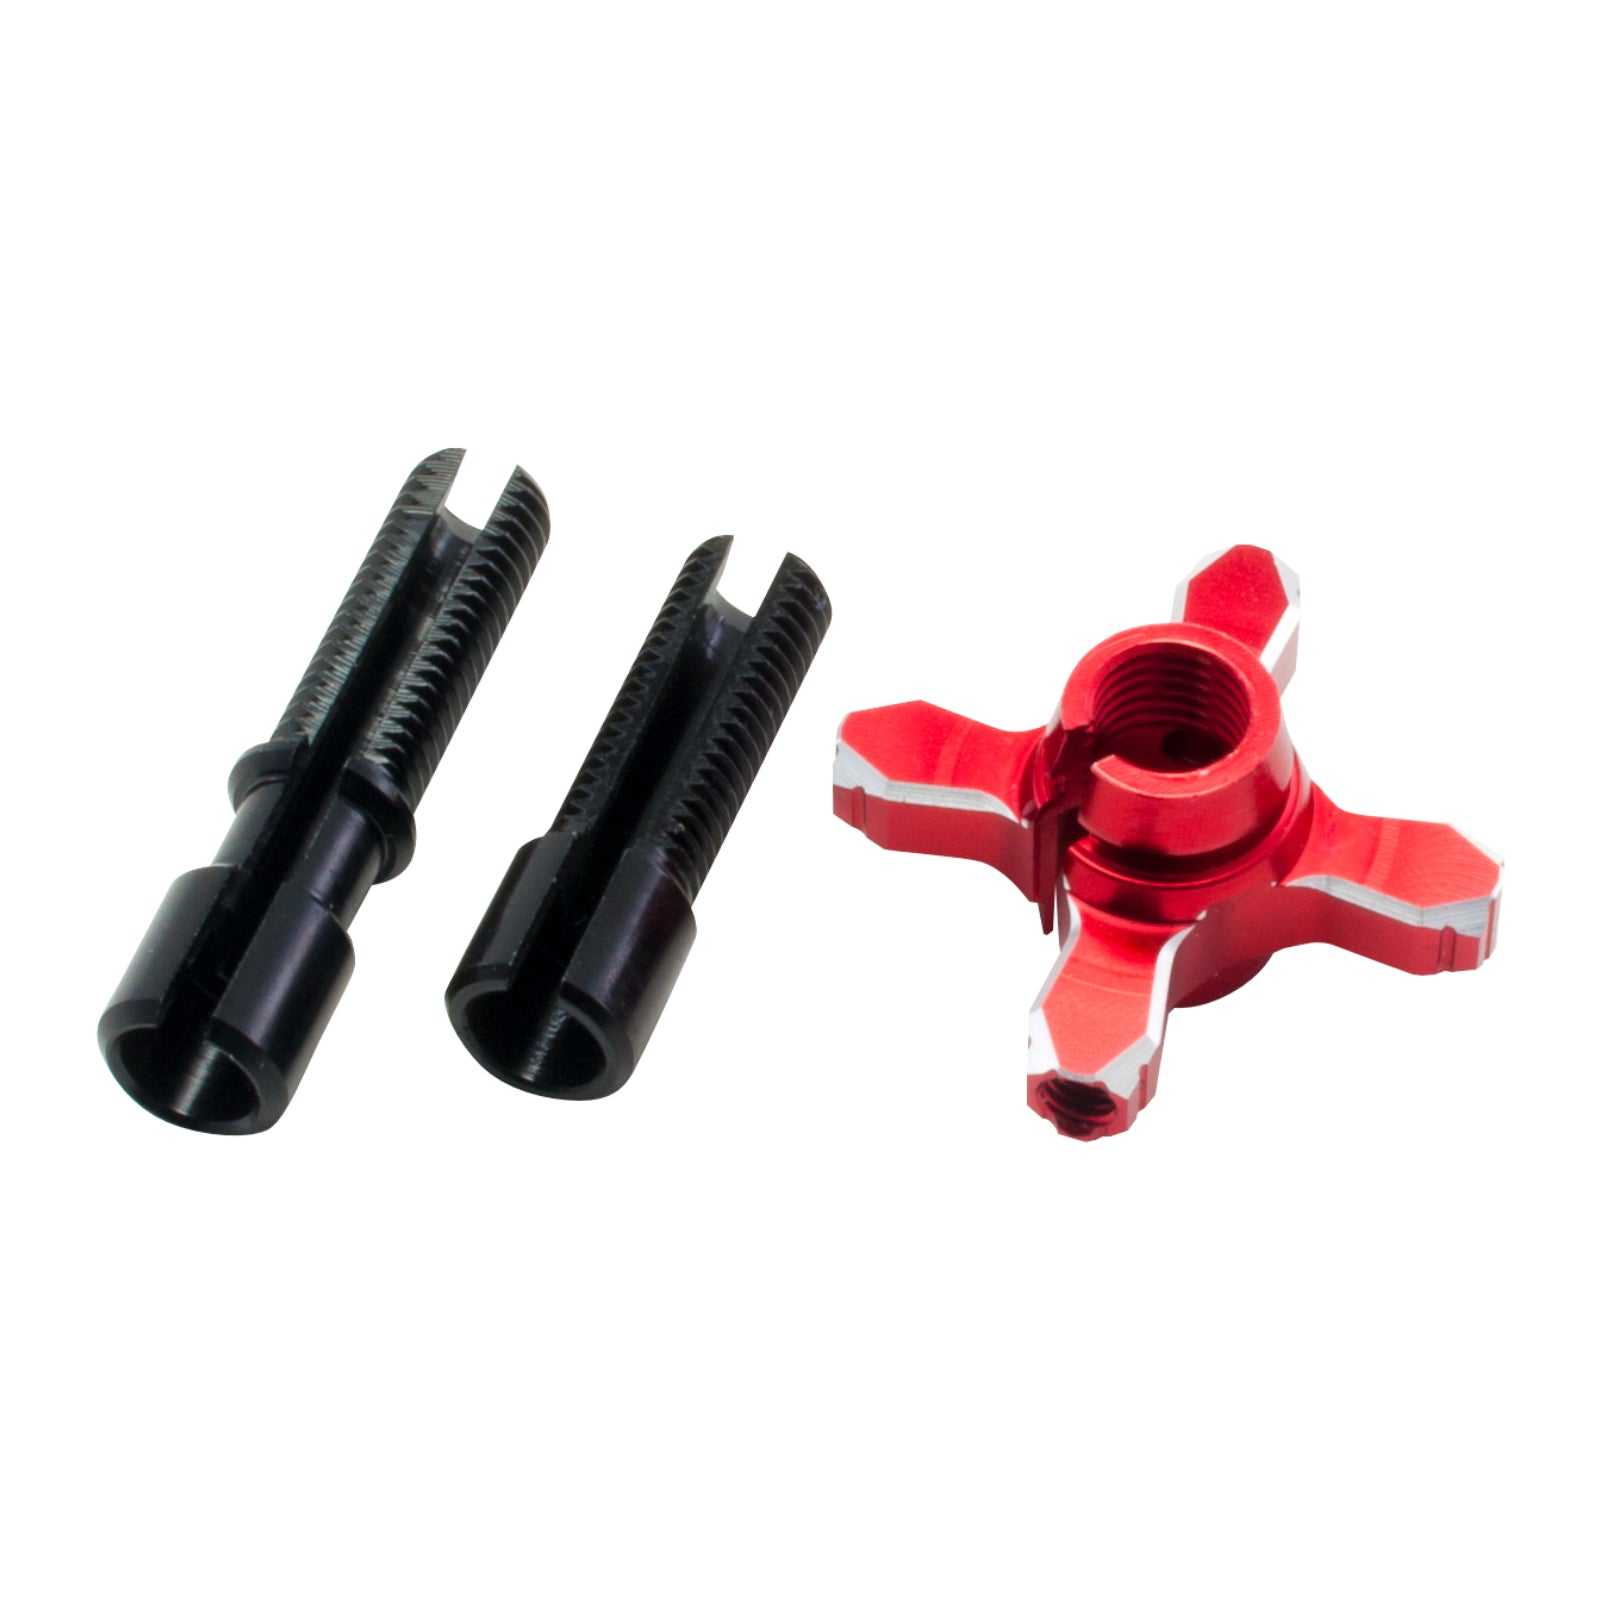 ZETA, Zeta Pivot Perch FP/CP Replacement Adjuster Assembly - Red